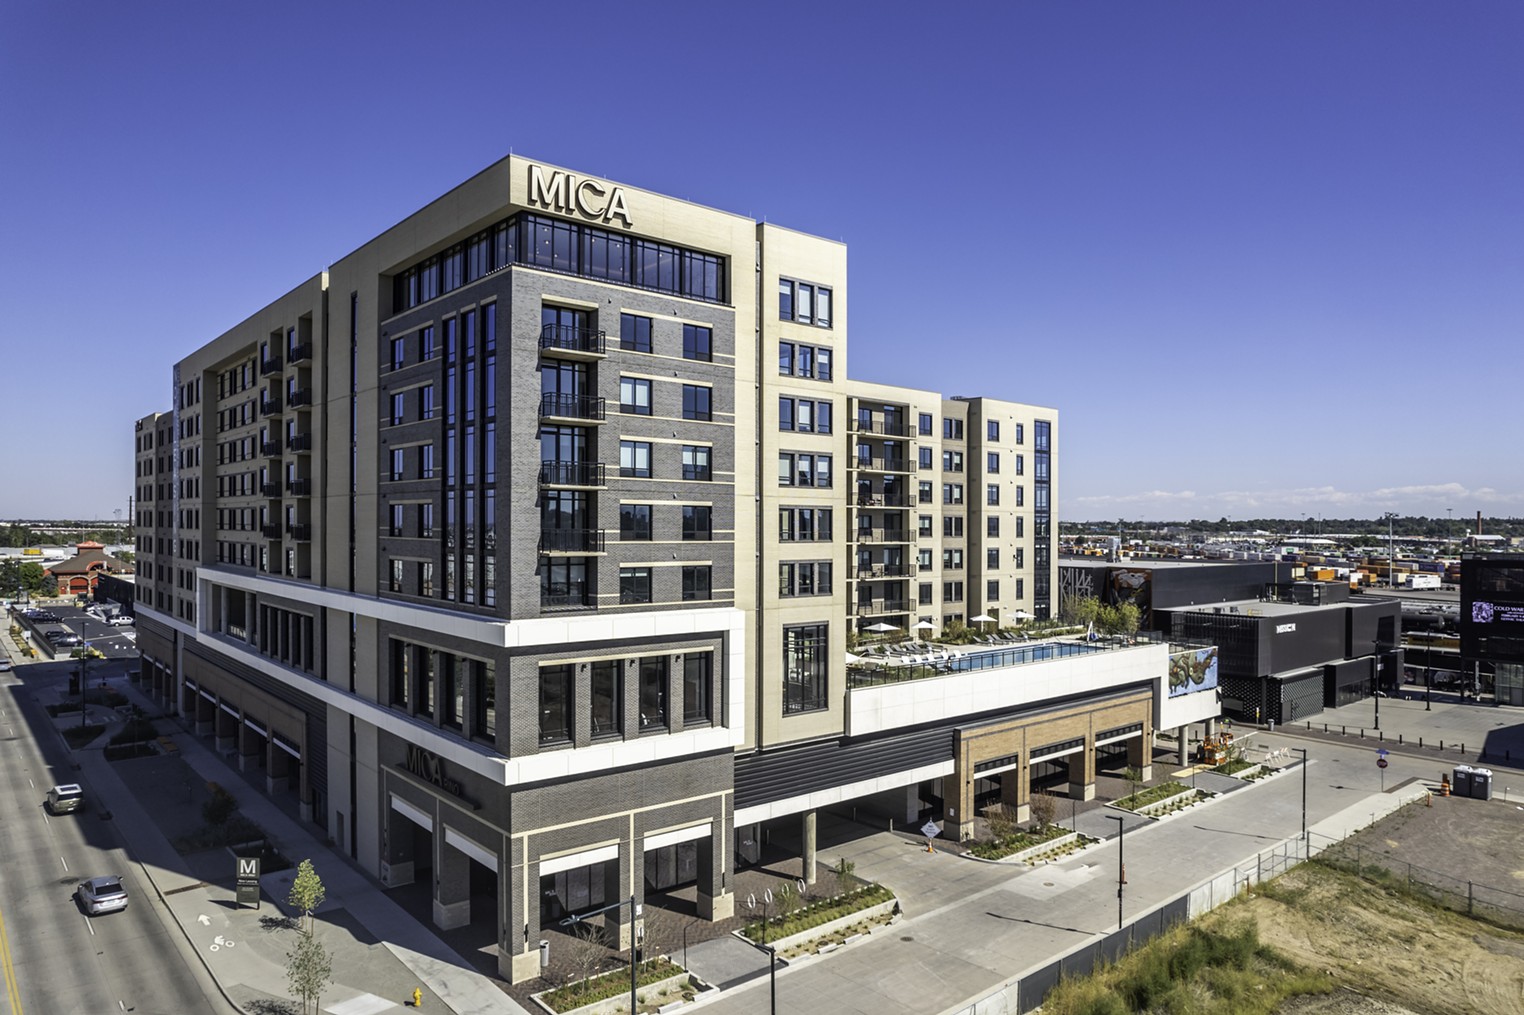 Mica RiNo offers luxury amenities and easy access to Denver nightlife